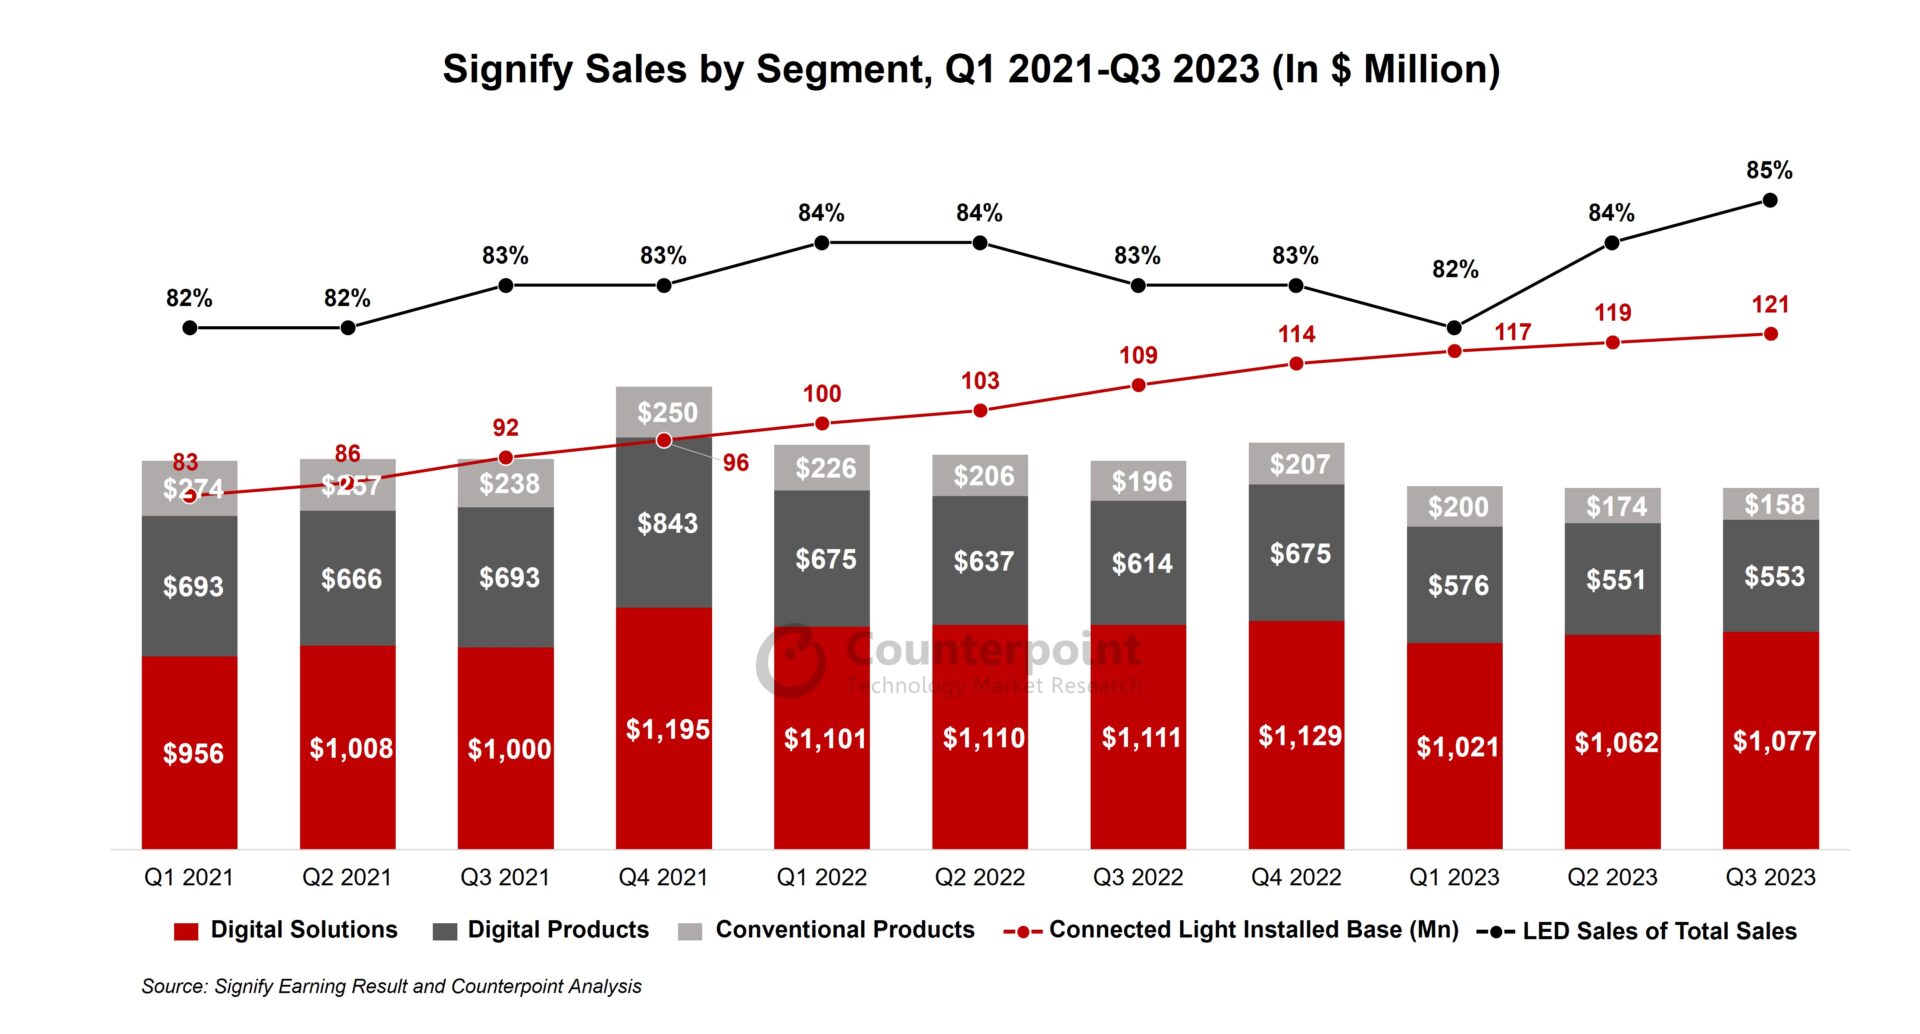 A chart showing Signify Sales by Segment in Q1 2021-Q3 2023